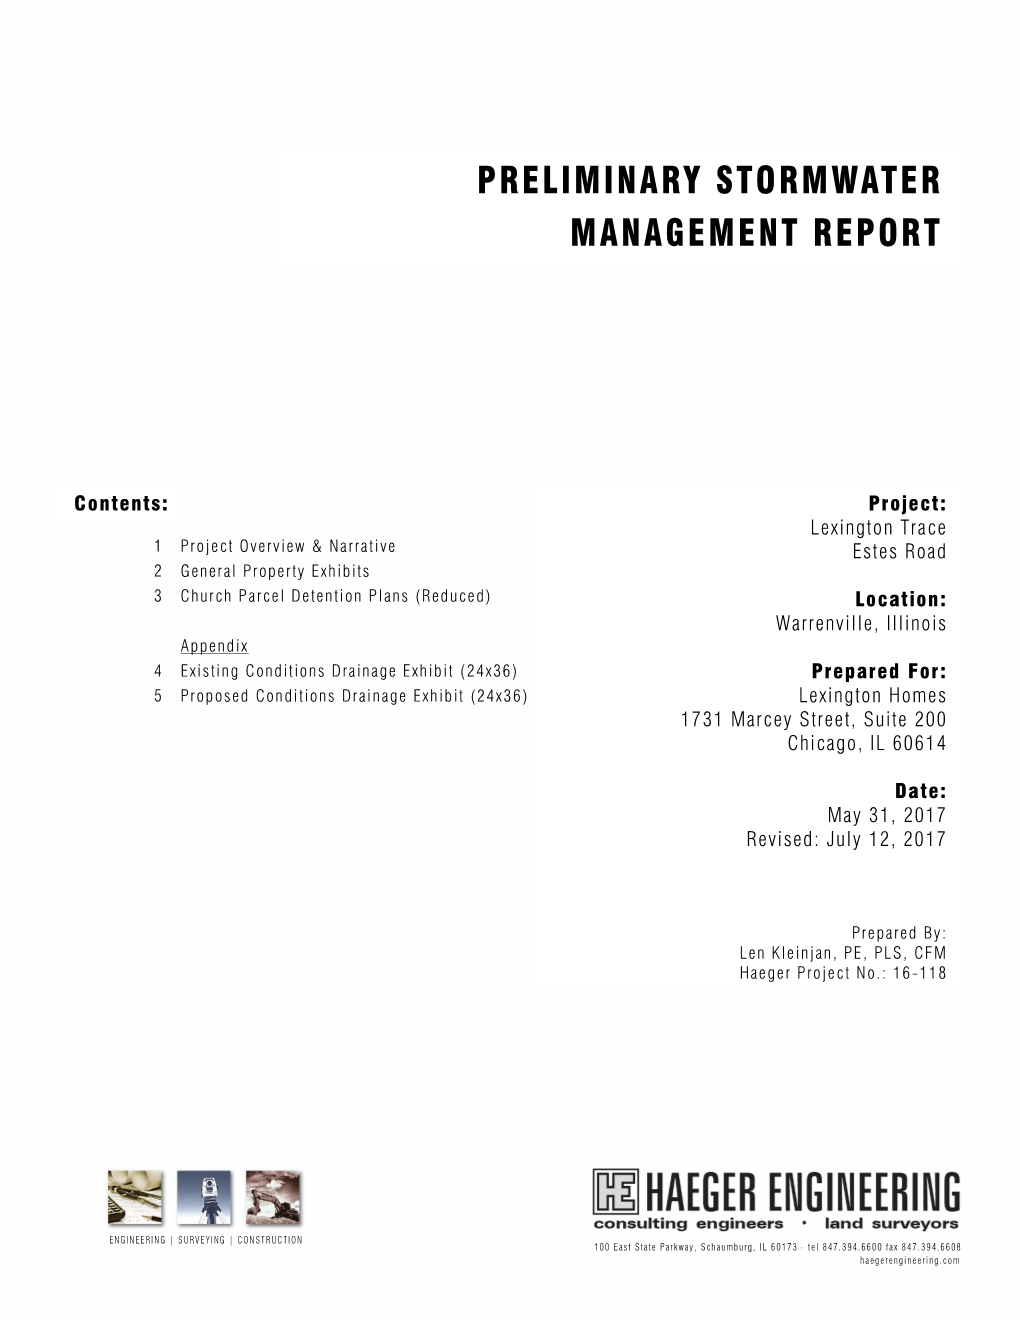 Preliminary Stormwater Management Report